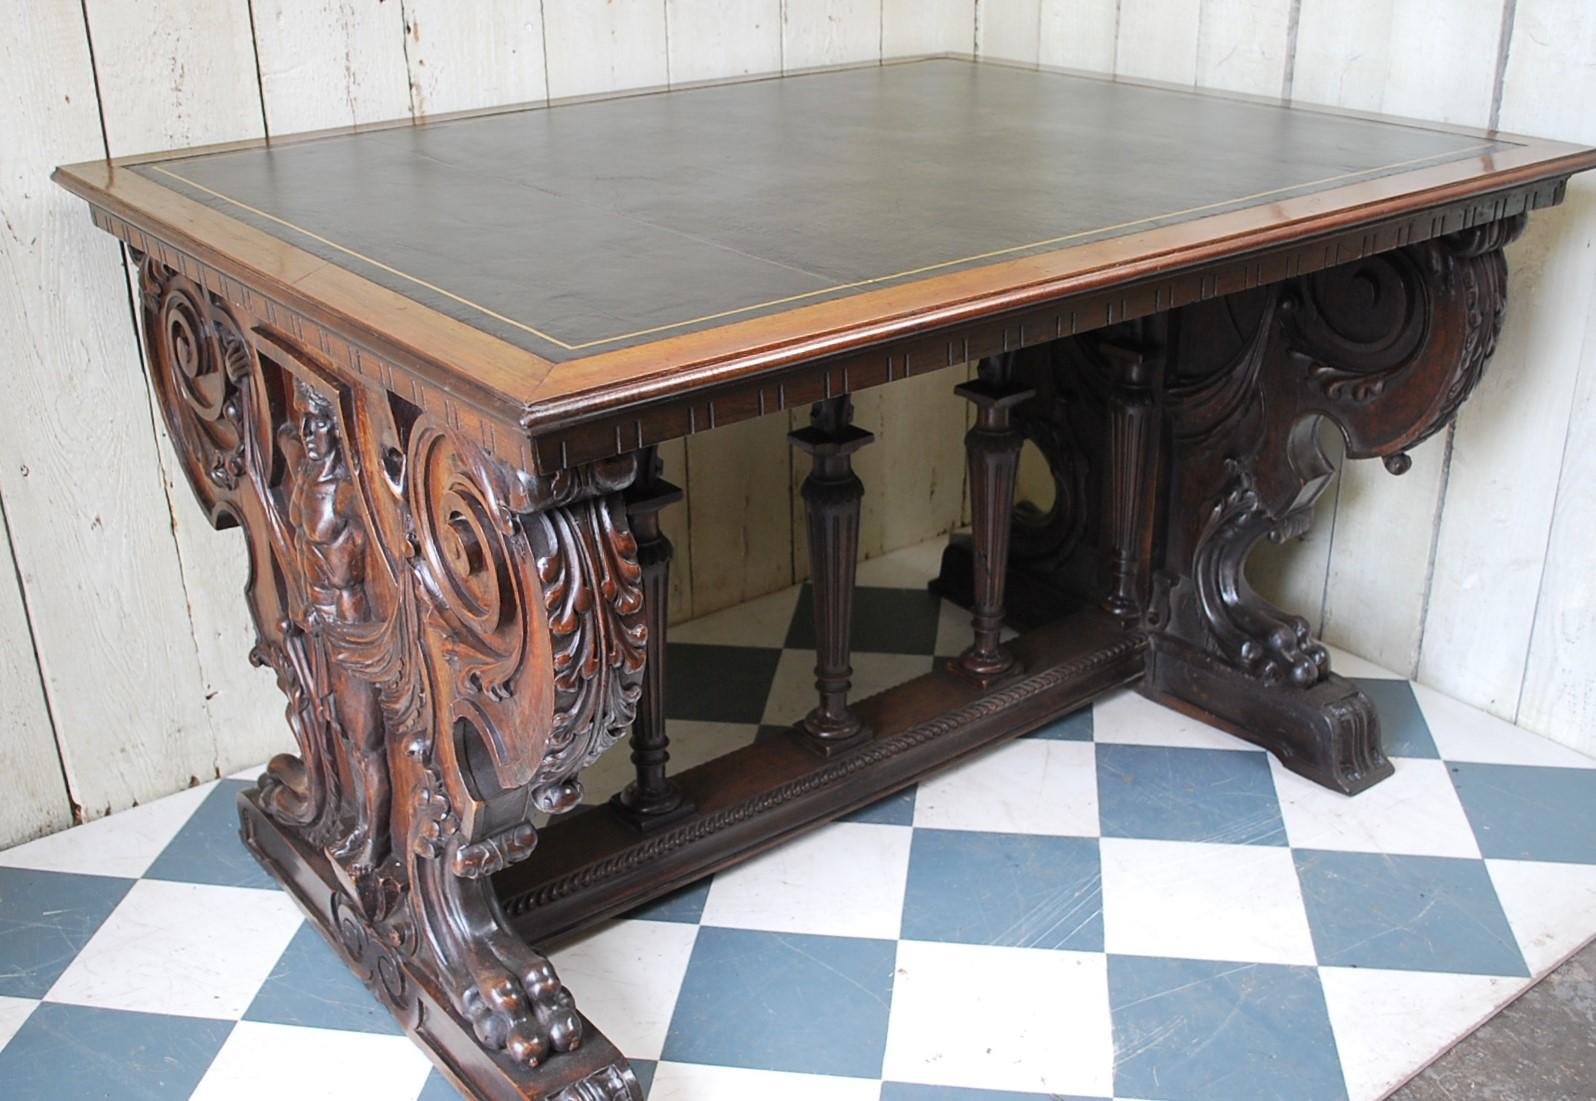 A superb decorative Italian writing desk, made in solid walnut with a black leather top. A beautiful representation of Renaissance design with bold trestle ends, exquisitely carved with a male figure standing at either end. Below are columns with